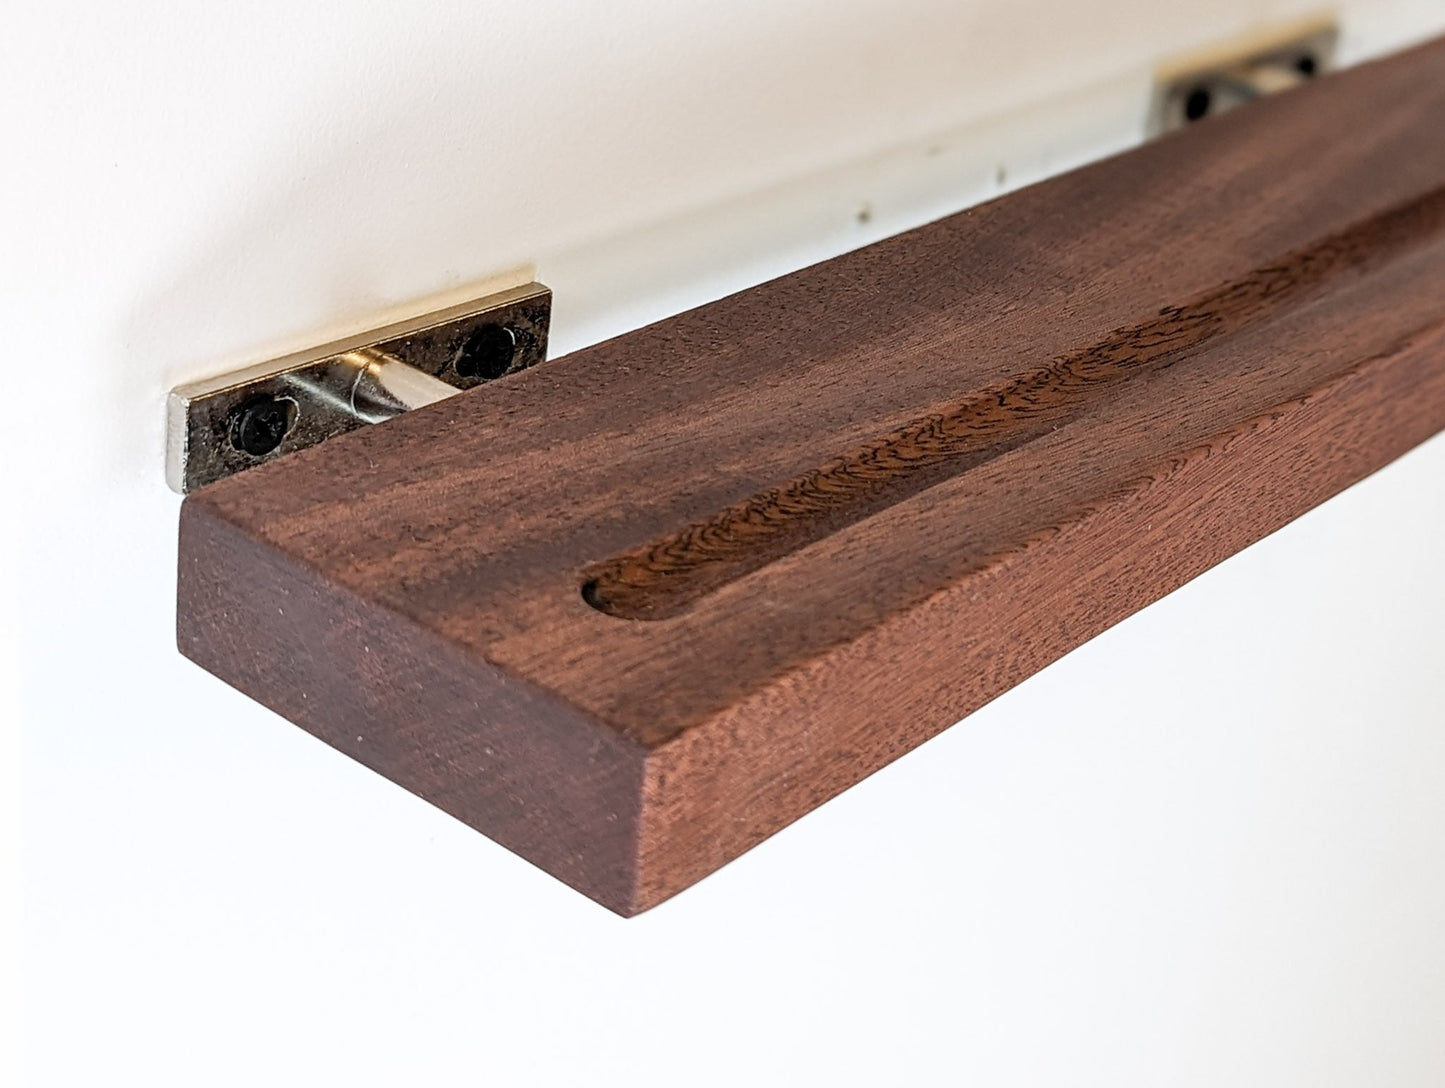 A mahogany shelf for vinyl records is sliding onto the hidden metal brackets that are attached to the wall.